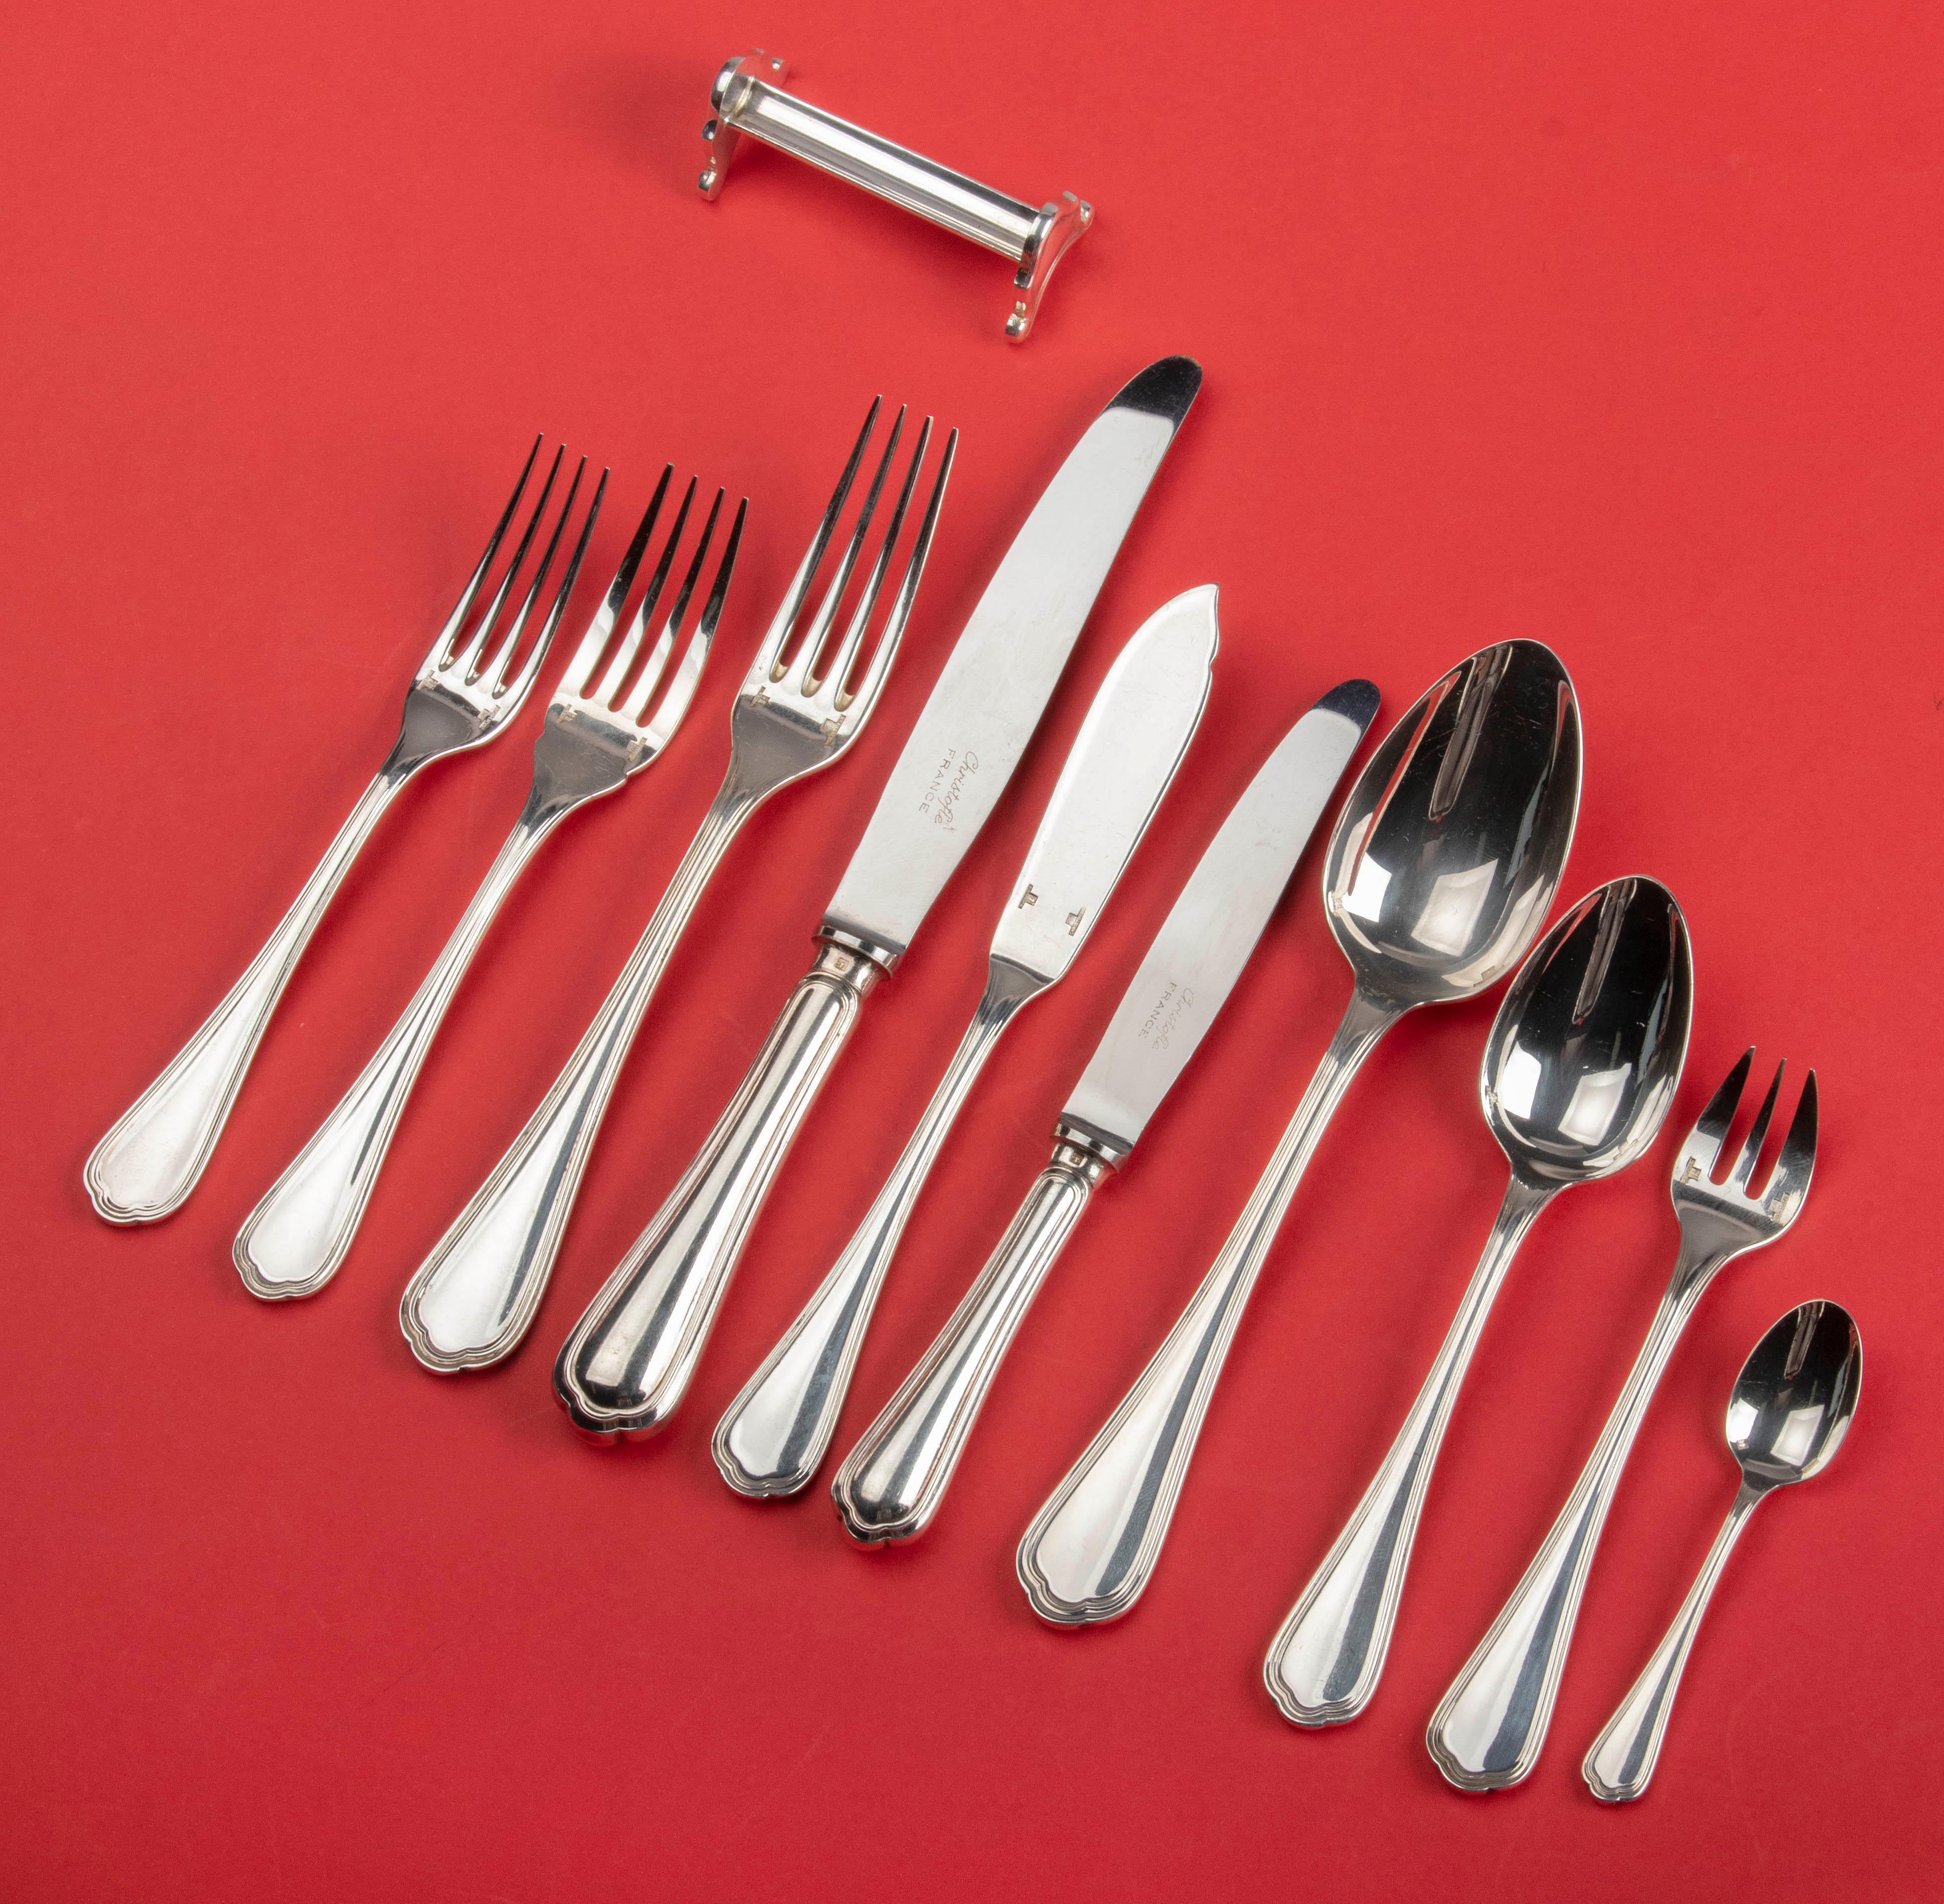 Great set of silver plated flatware for 12 people from the French brand Christofle. The model's name is Spatours, a classic and timeless design with curves at the bottom of the handles and a fine line. The cutlery is in very good condition and has a